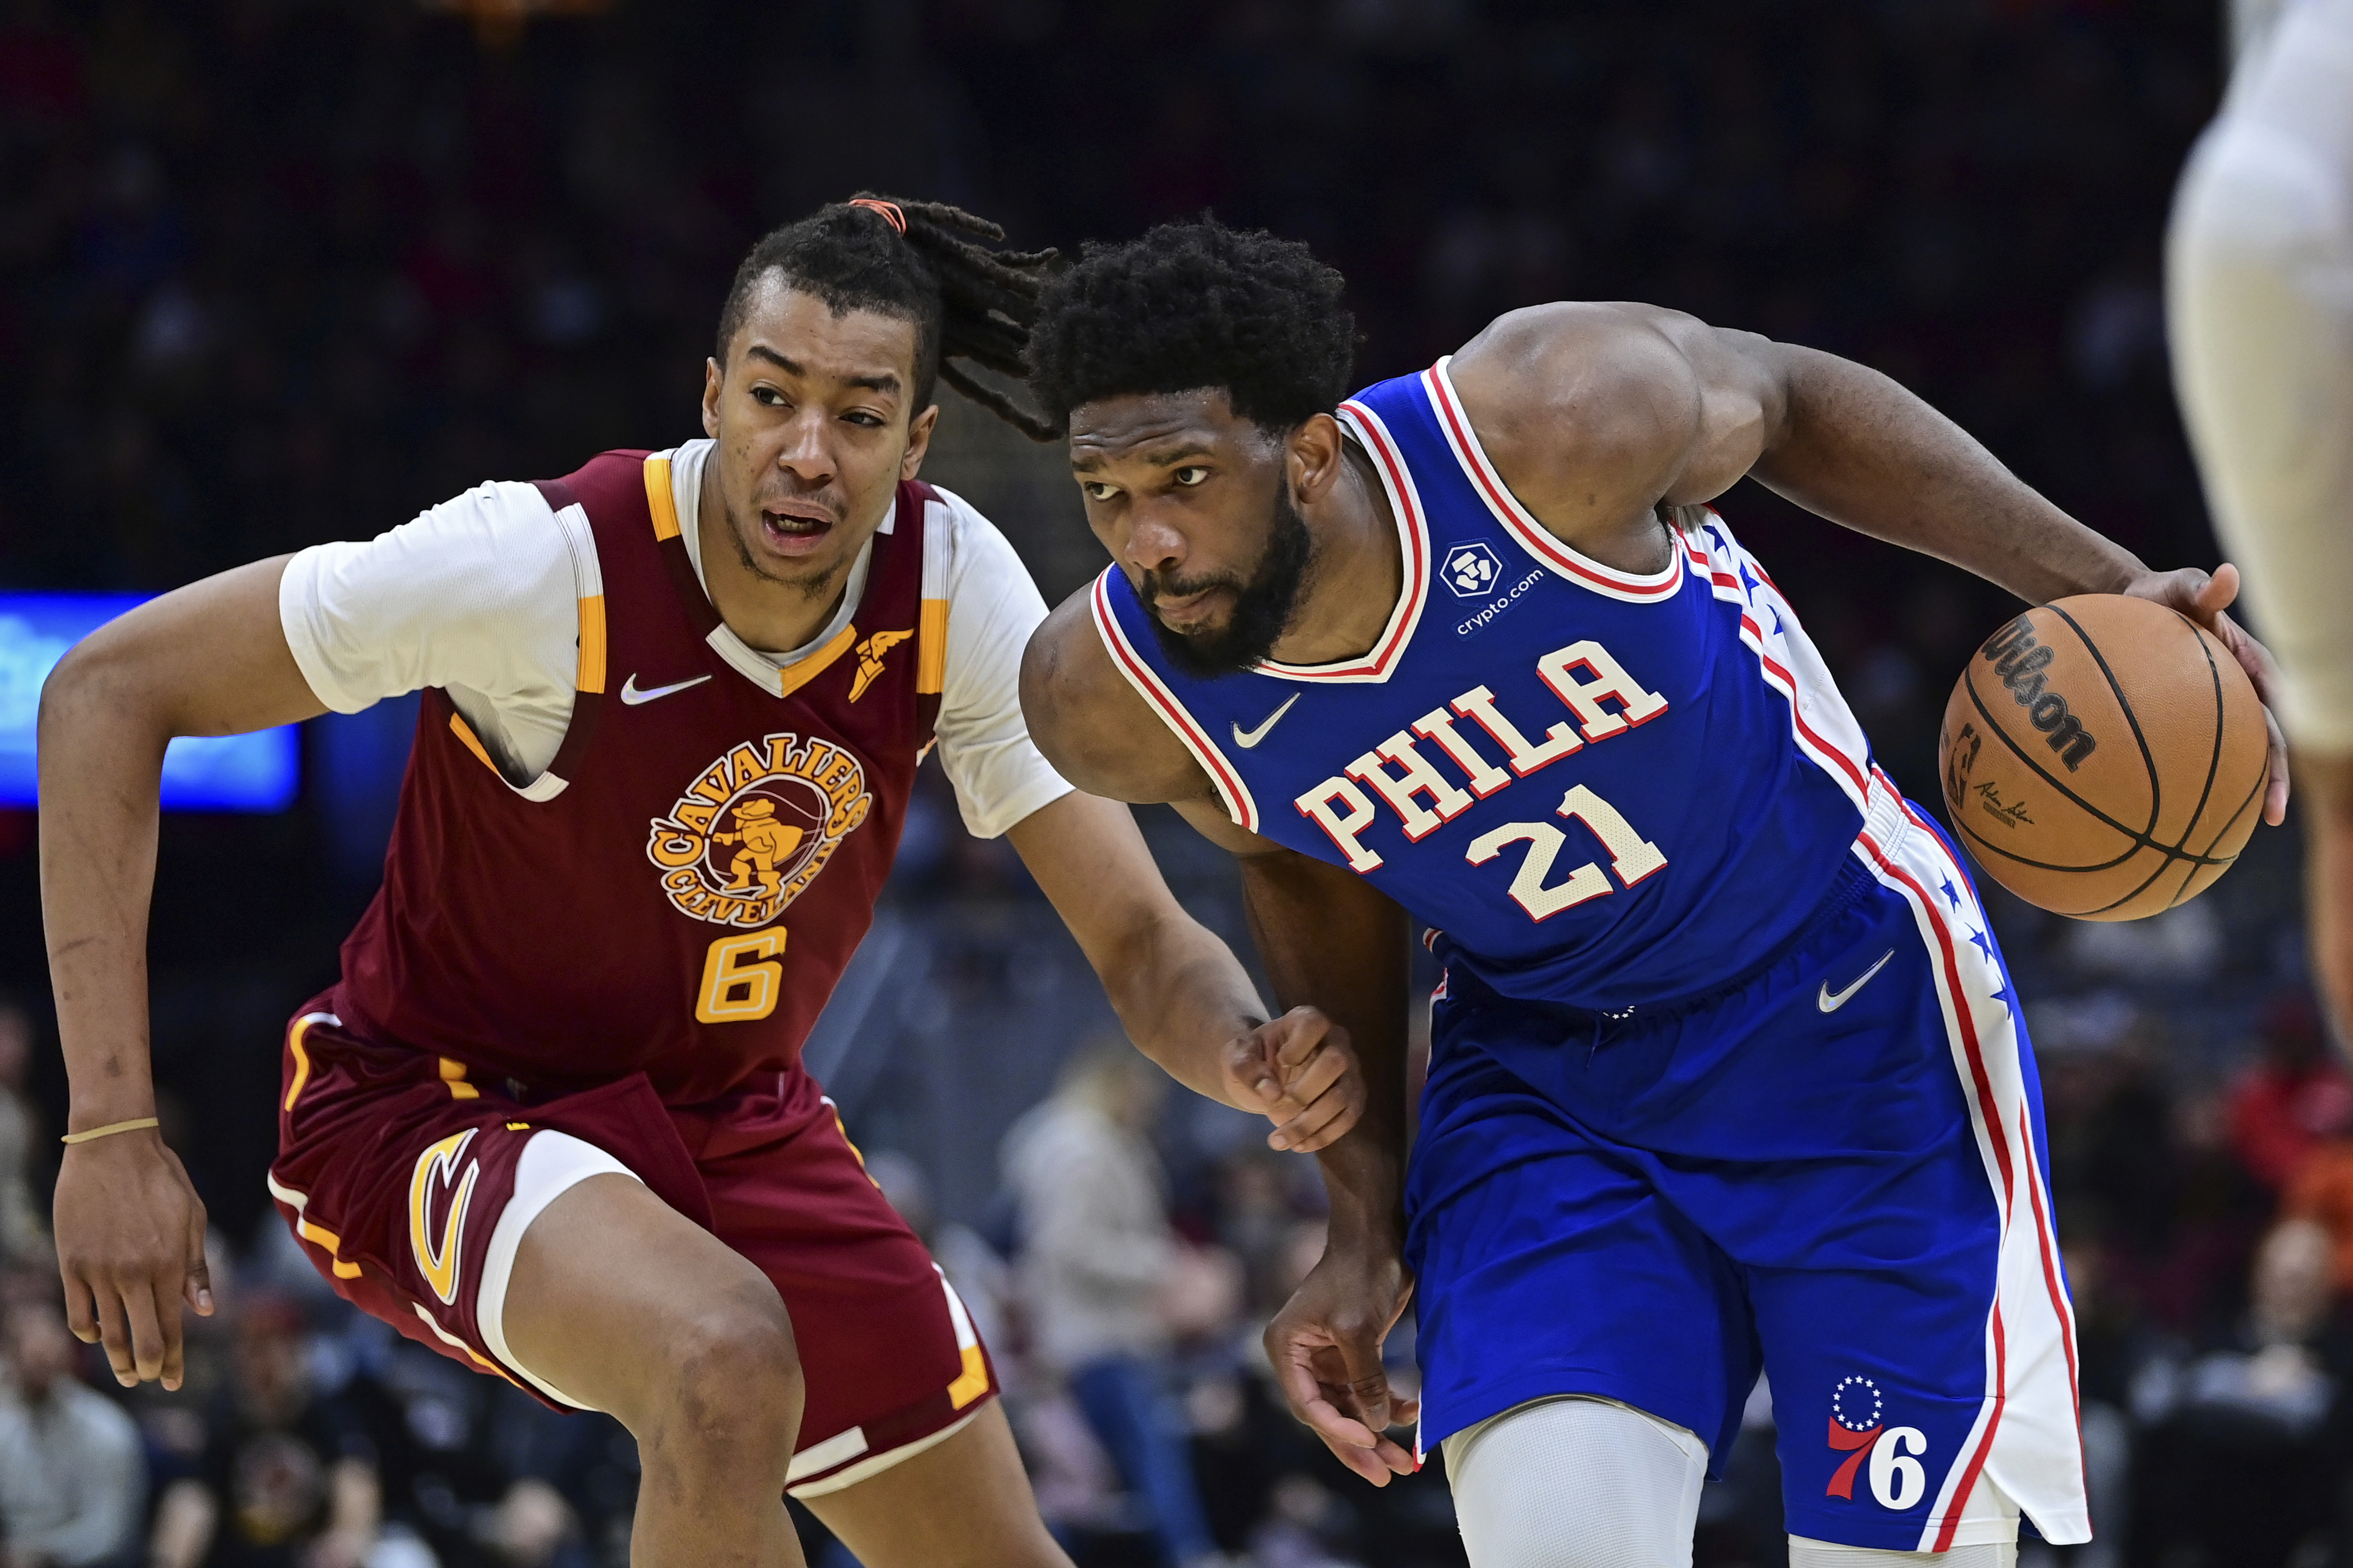 76ers vs. Trail Blazers prediction, betting odds for NBA on